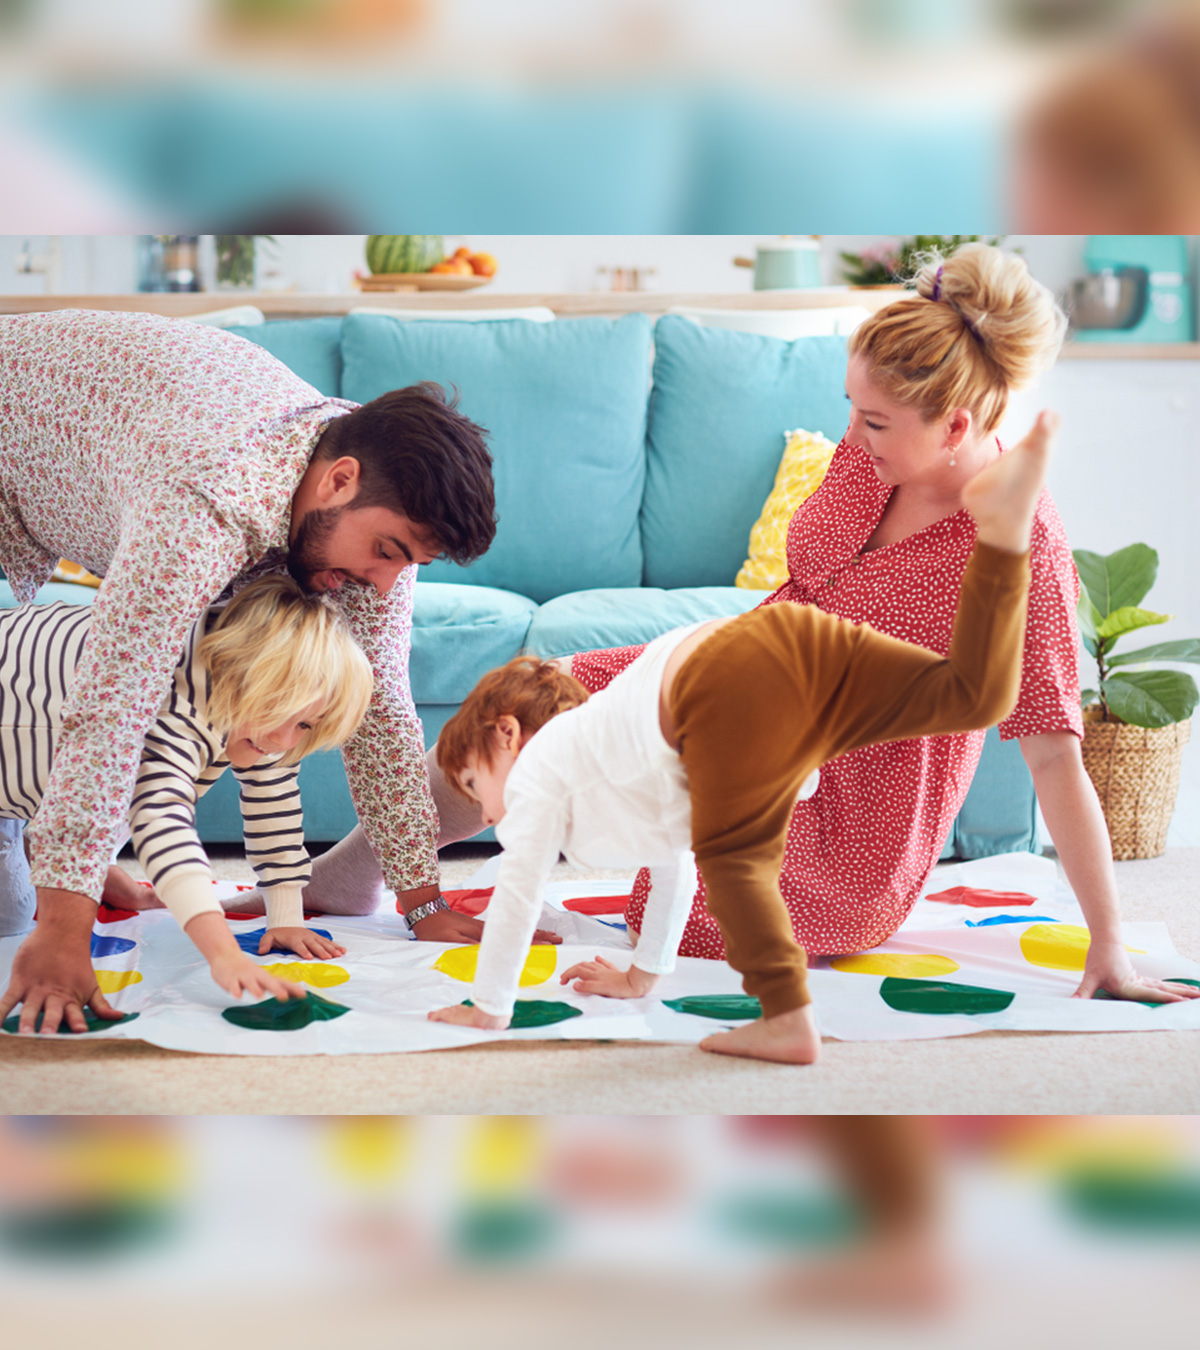 9 Parent-Child Bonding Activities That You Can Do Indoors